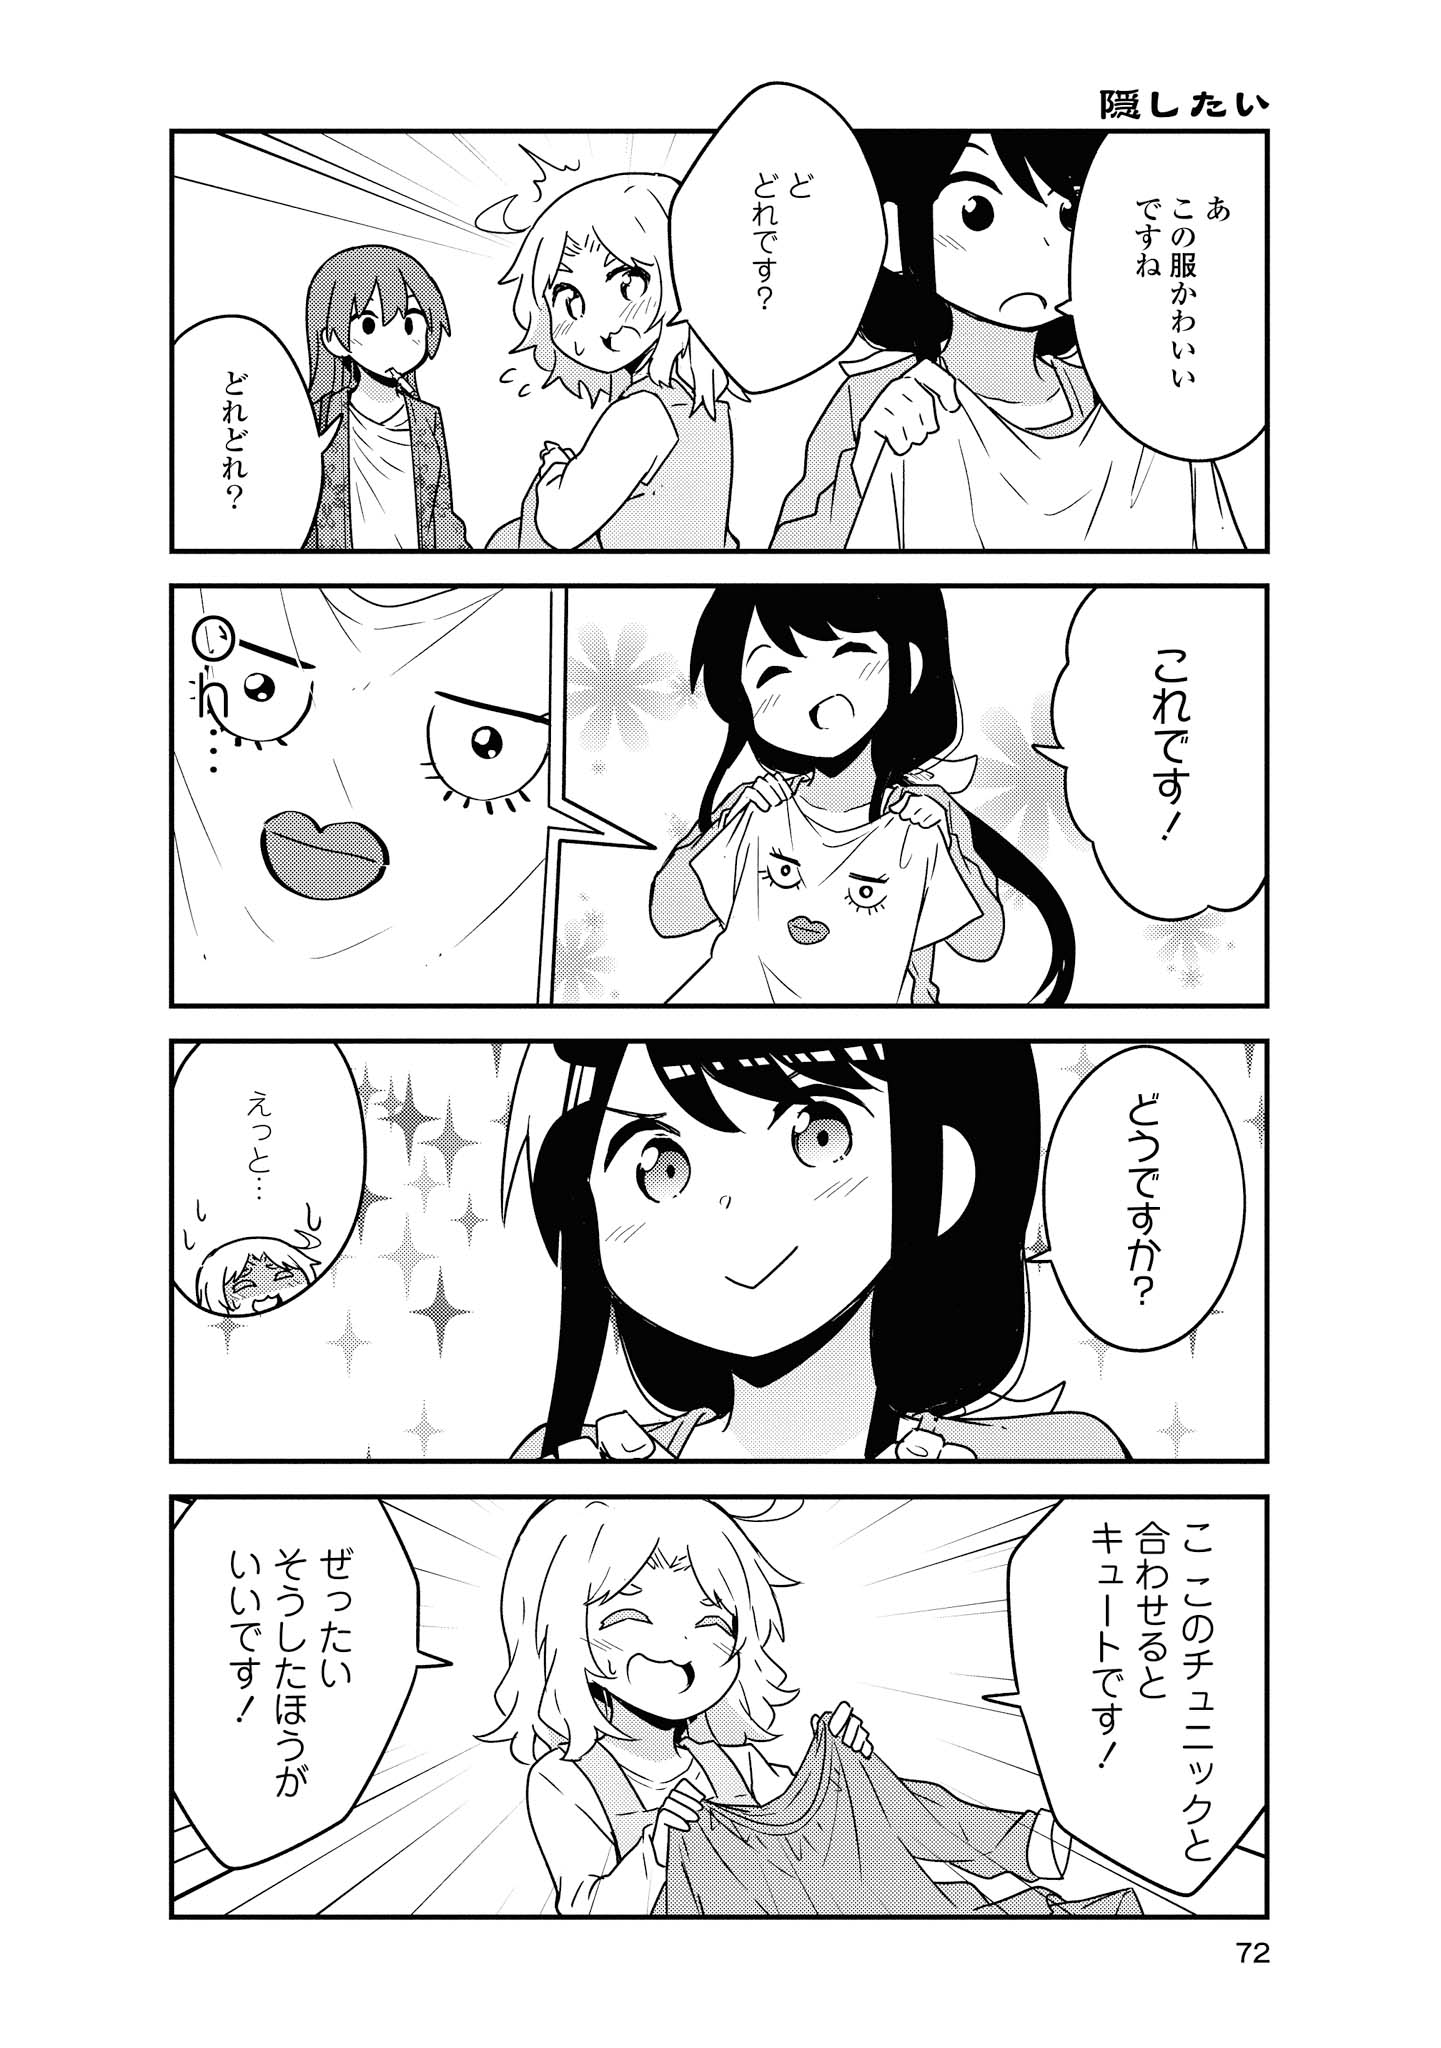 Wataten! An Angel Flew Down to Me 私に天使が舞い降りた！ 第56話 - Page 6